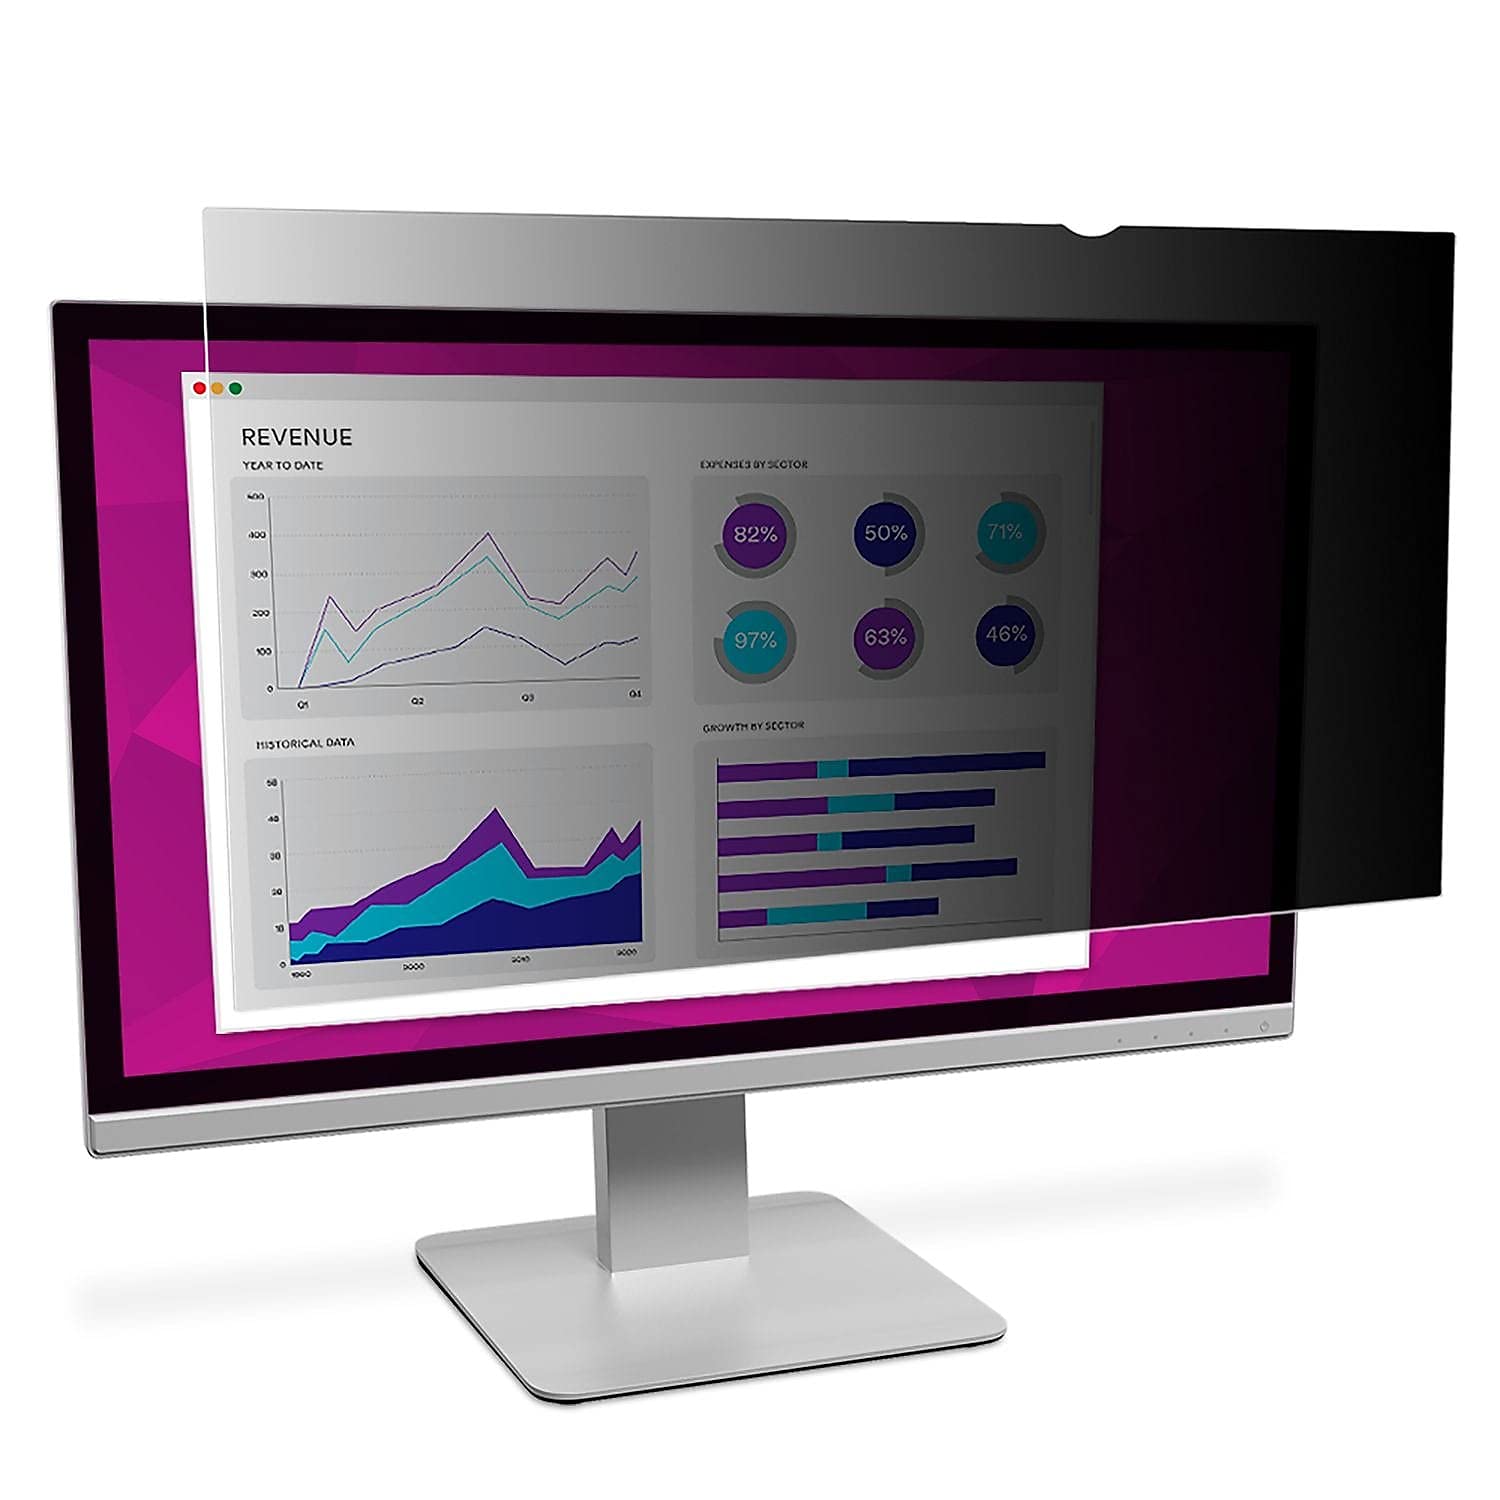 3M HC240W1B Privacy Filter High Clarity 24 16:10, 7100136967 (Clarity 24 16:10), 24" Widescreen Monitor (16:10 Aspect Ratio)